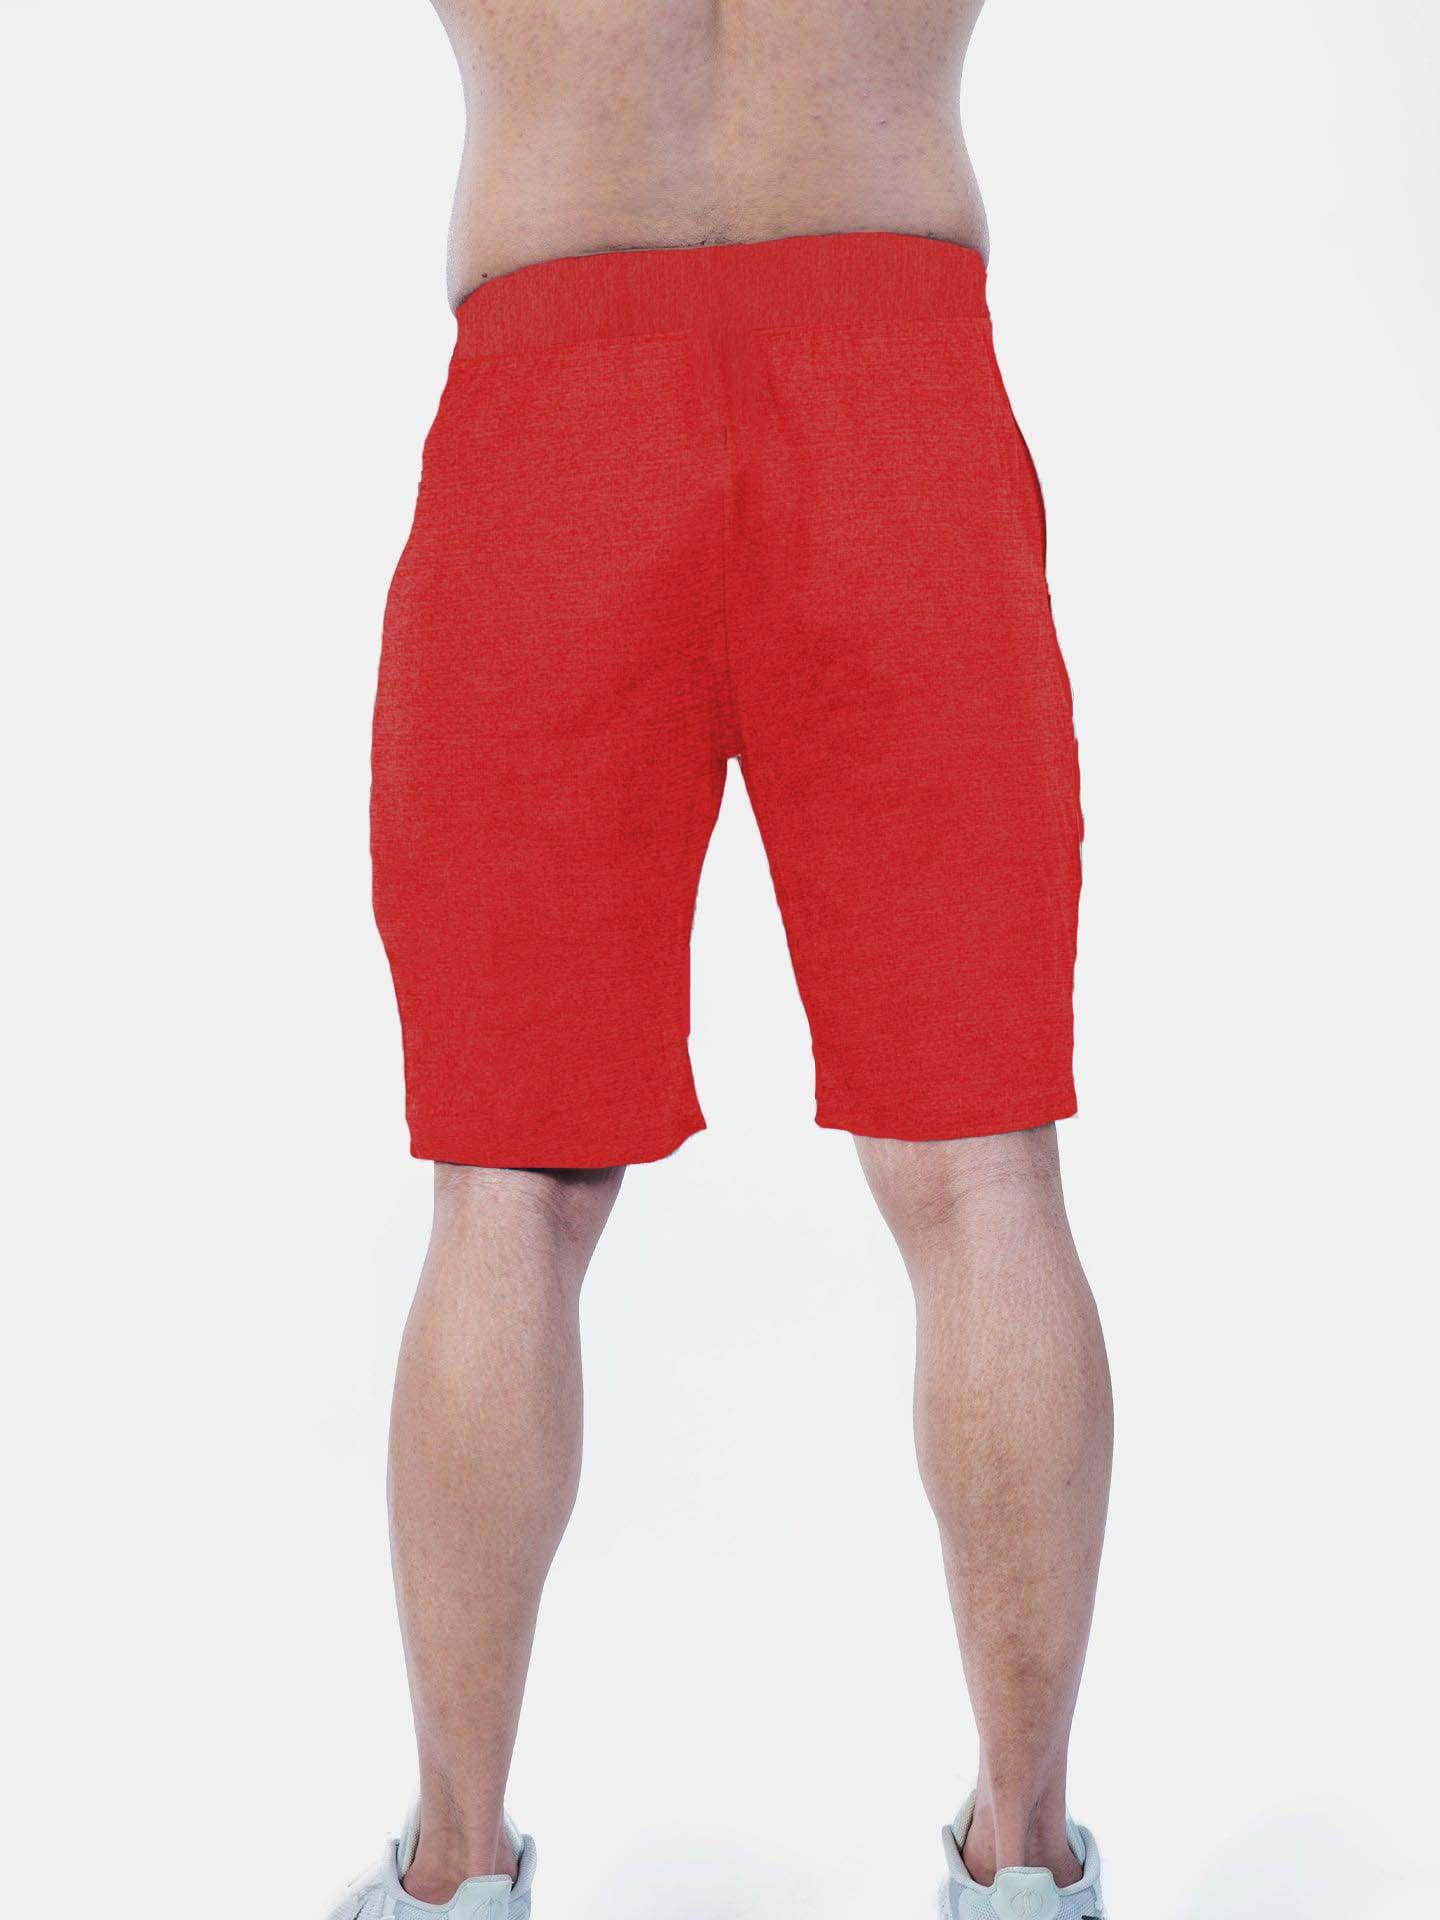 Red Shorts - Sale - GymX